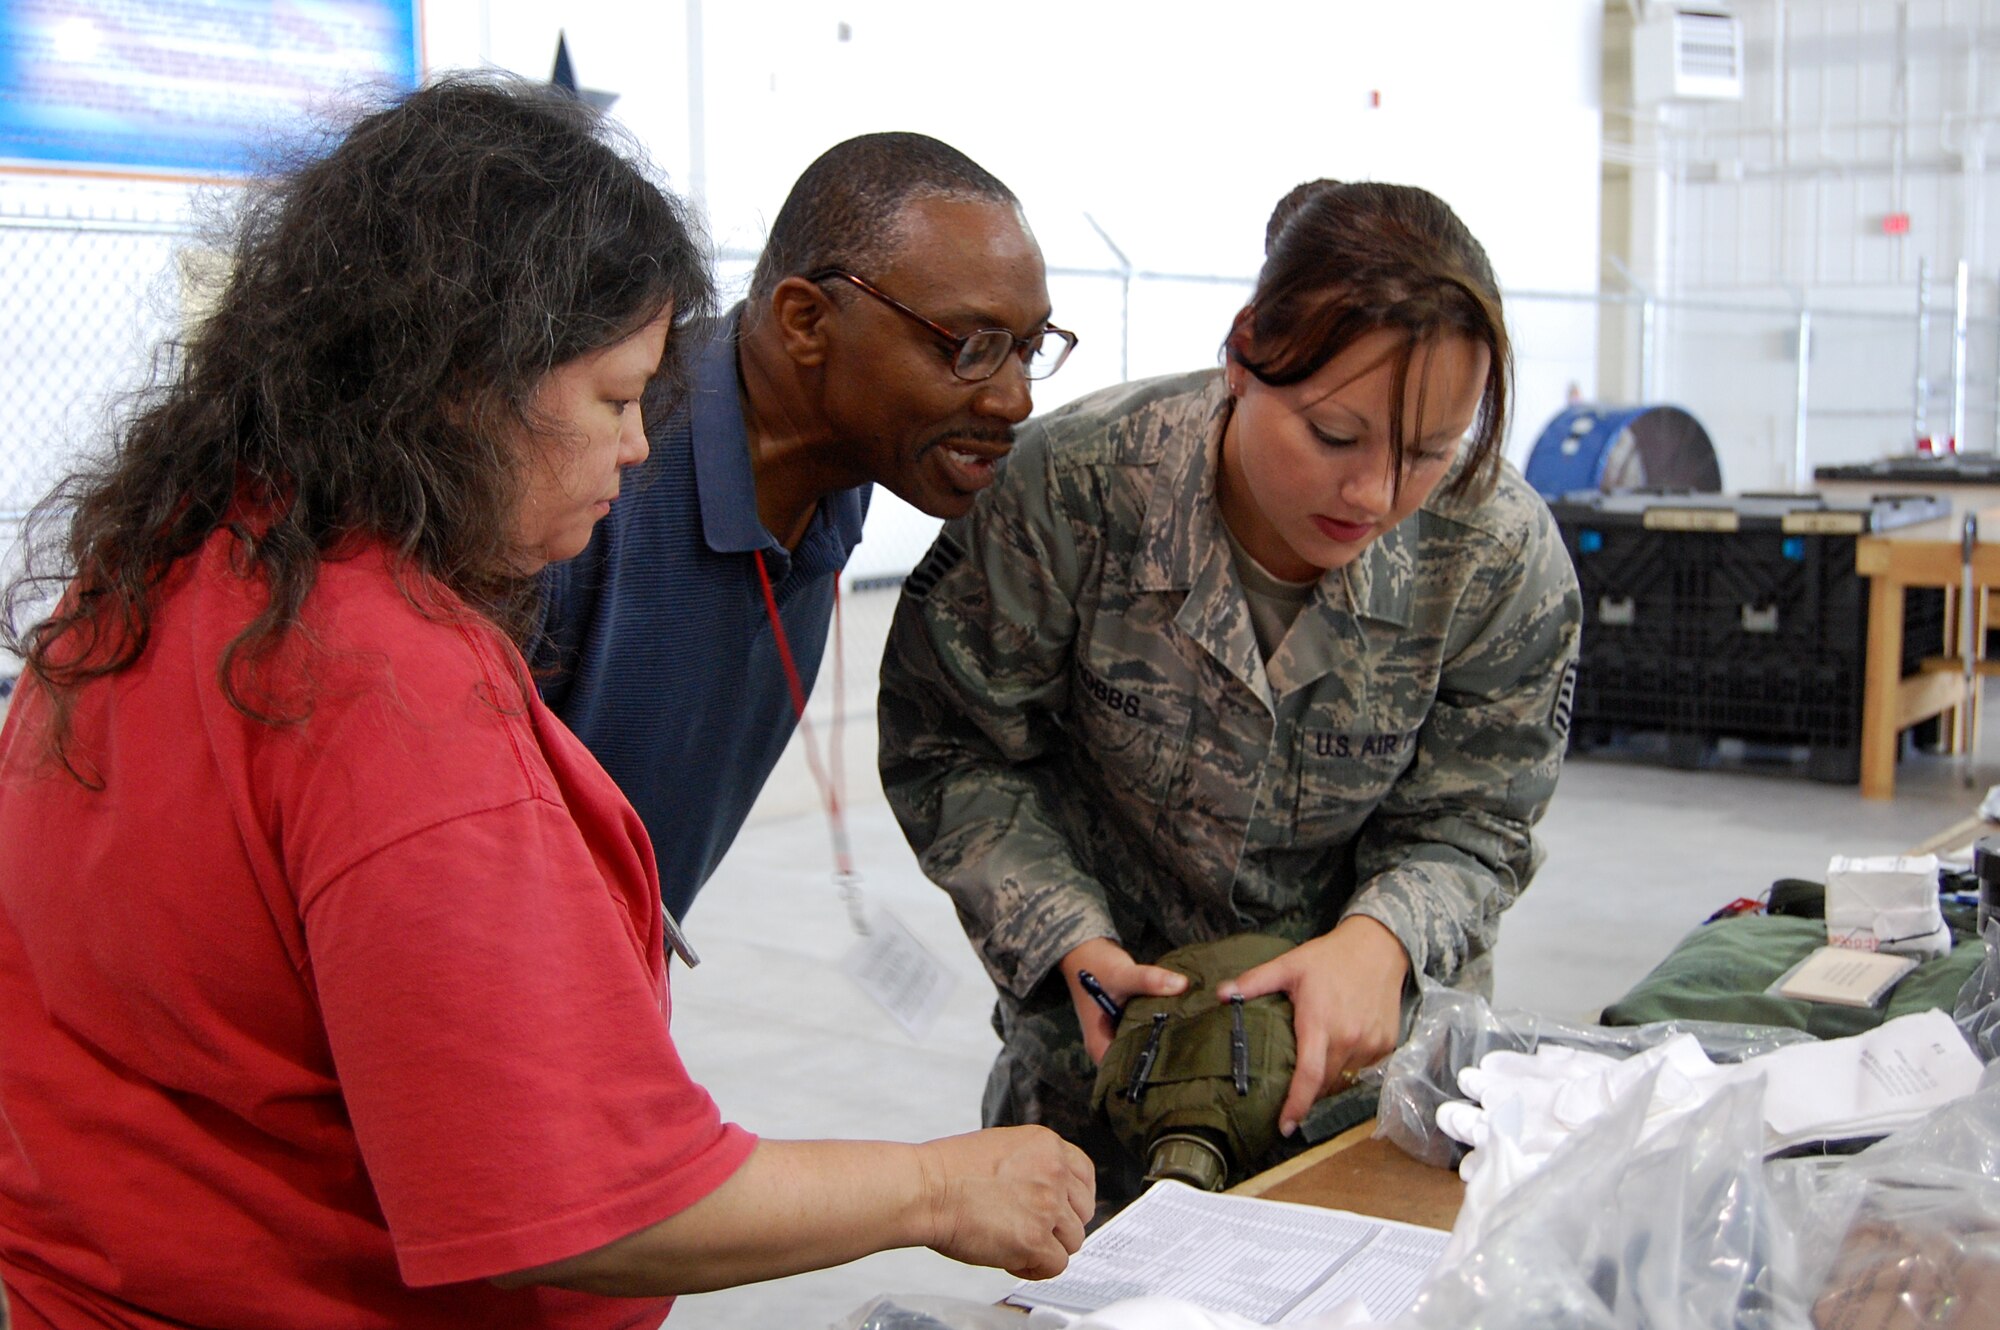 Kezia Hillary, 902nd Logistics Readiness Squadron, left, and Mr. Ken Hall, 902nd LRS, center, assist Tech. Sgt. Jessica Hobbs, Air Force Personnel Center, in inventorying her deployment equipment at the 902nd LRS Deployment Processing Center on Randolph Air Force Base Aug. 10. During exercise Joint Base San Antonio 10-08, more than 200 Airmen from different agencies on Randolph AFB participated in the two-day deployment exercise. (U.S. Air Force photo/Master Sgt. Paul Kilgallon)